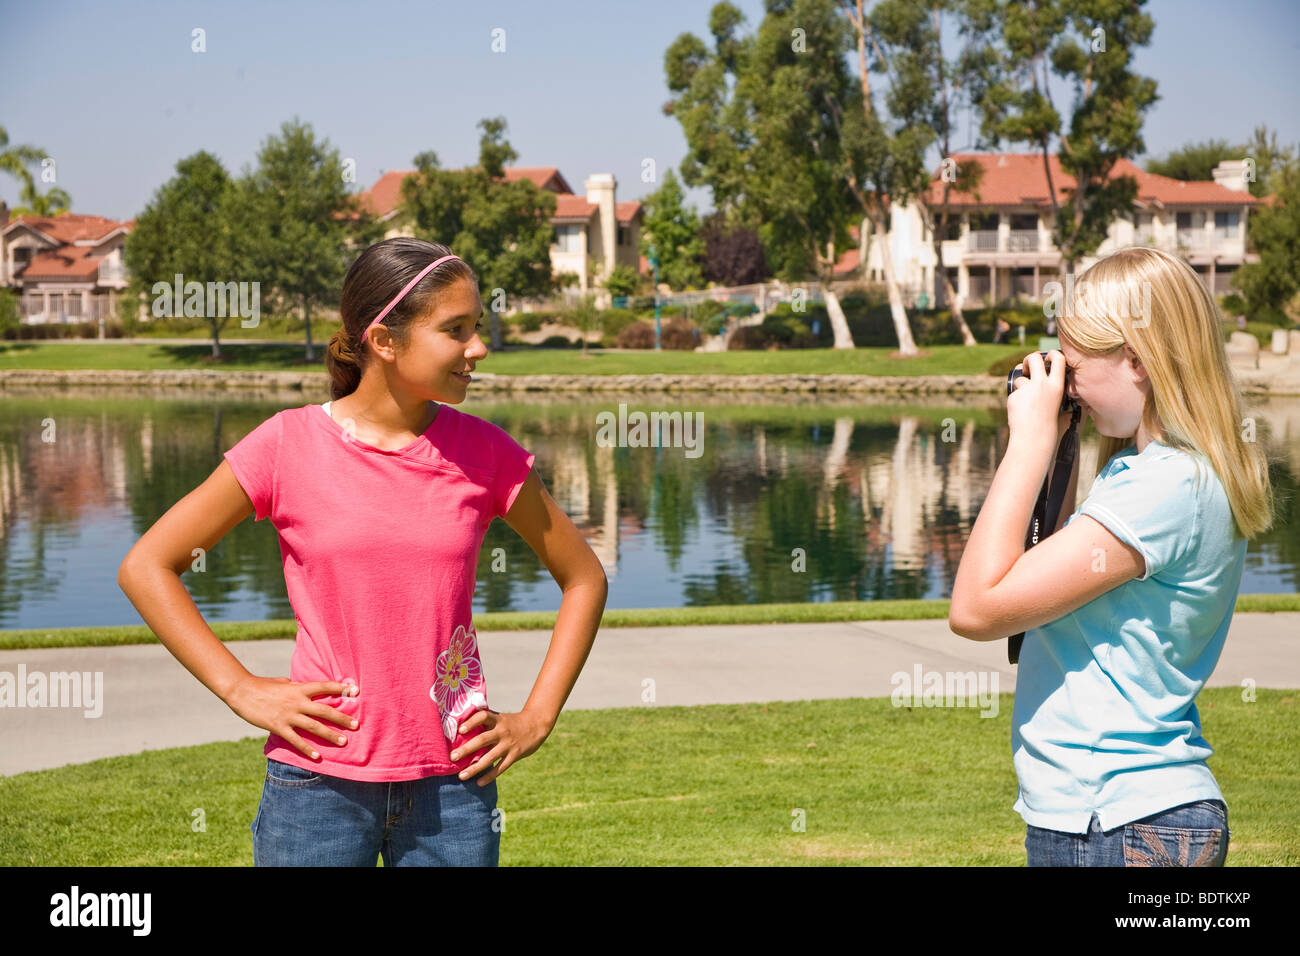 Two focused girls 8-9 year old pour fluid children multi inter racial diversity racially diverse multicultural cultural interracial POV United States Stock Photo